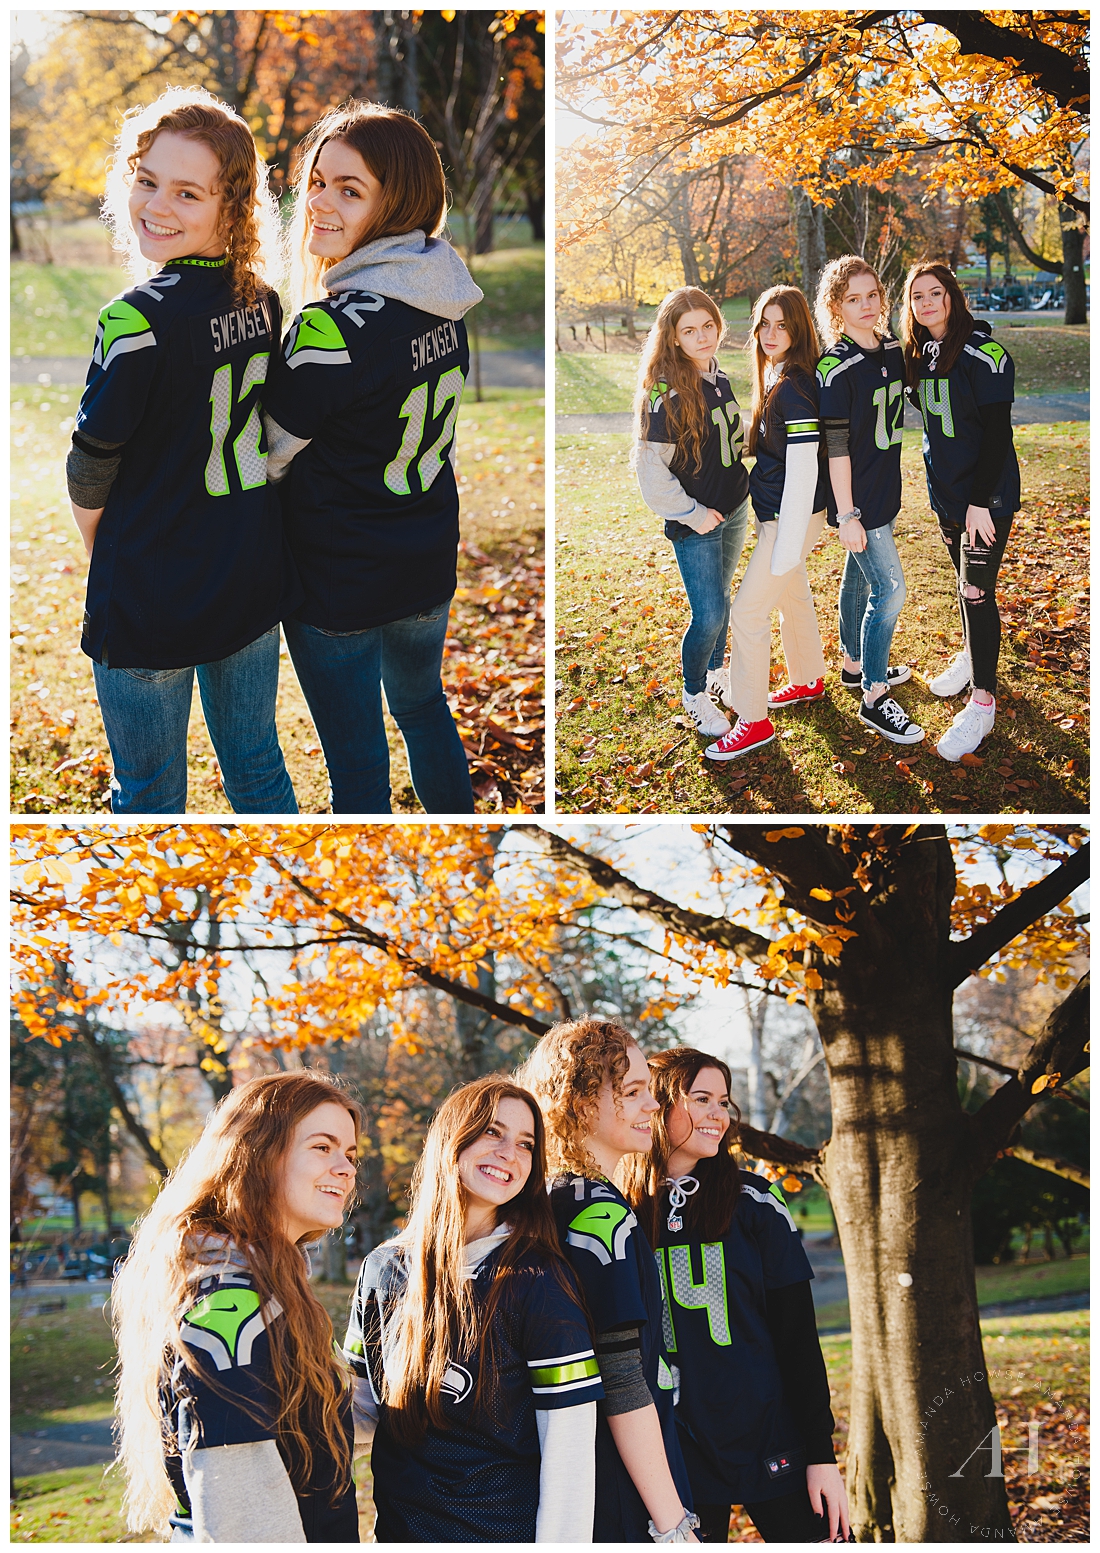 Group Portraits of AHP Model Team in Seahawks Jerseys for Fall Football-Themed Portrait Session | How to Show Team Spirit for Senior Portraits, Athletic Senior Photos, Pose Ideas, Sports Teams, Seattle Seahawks | Photographed by the Best Tacoma Senior Photographer Amanda Howse